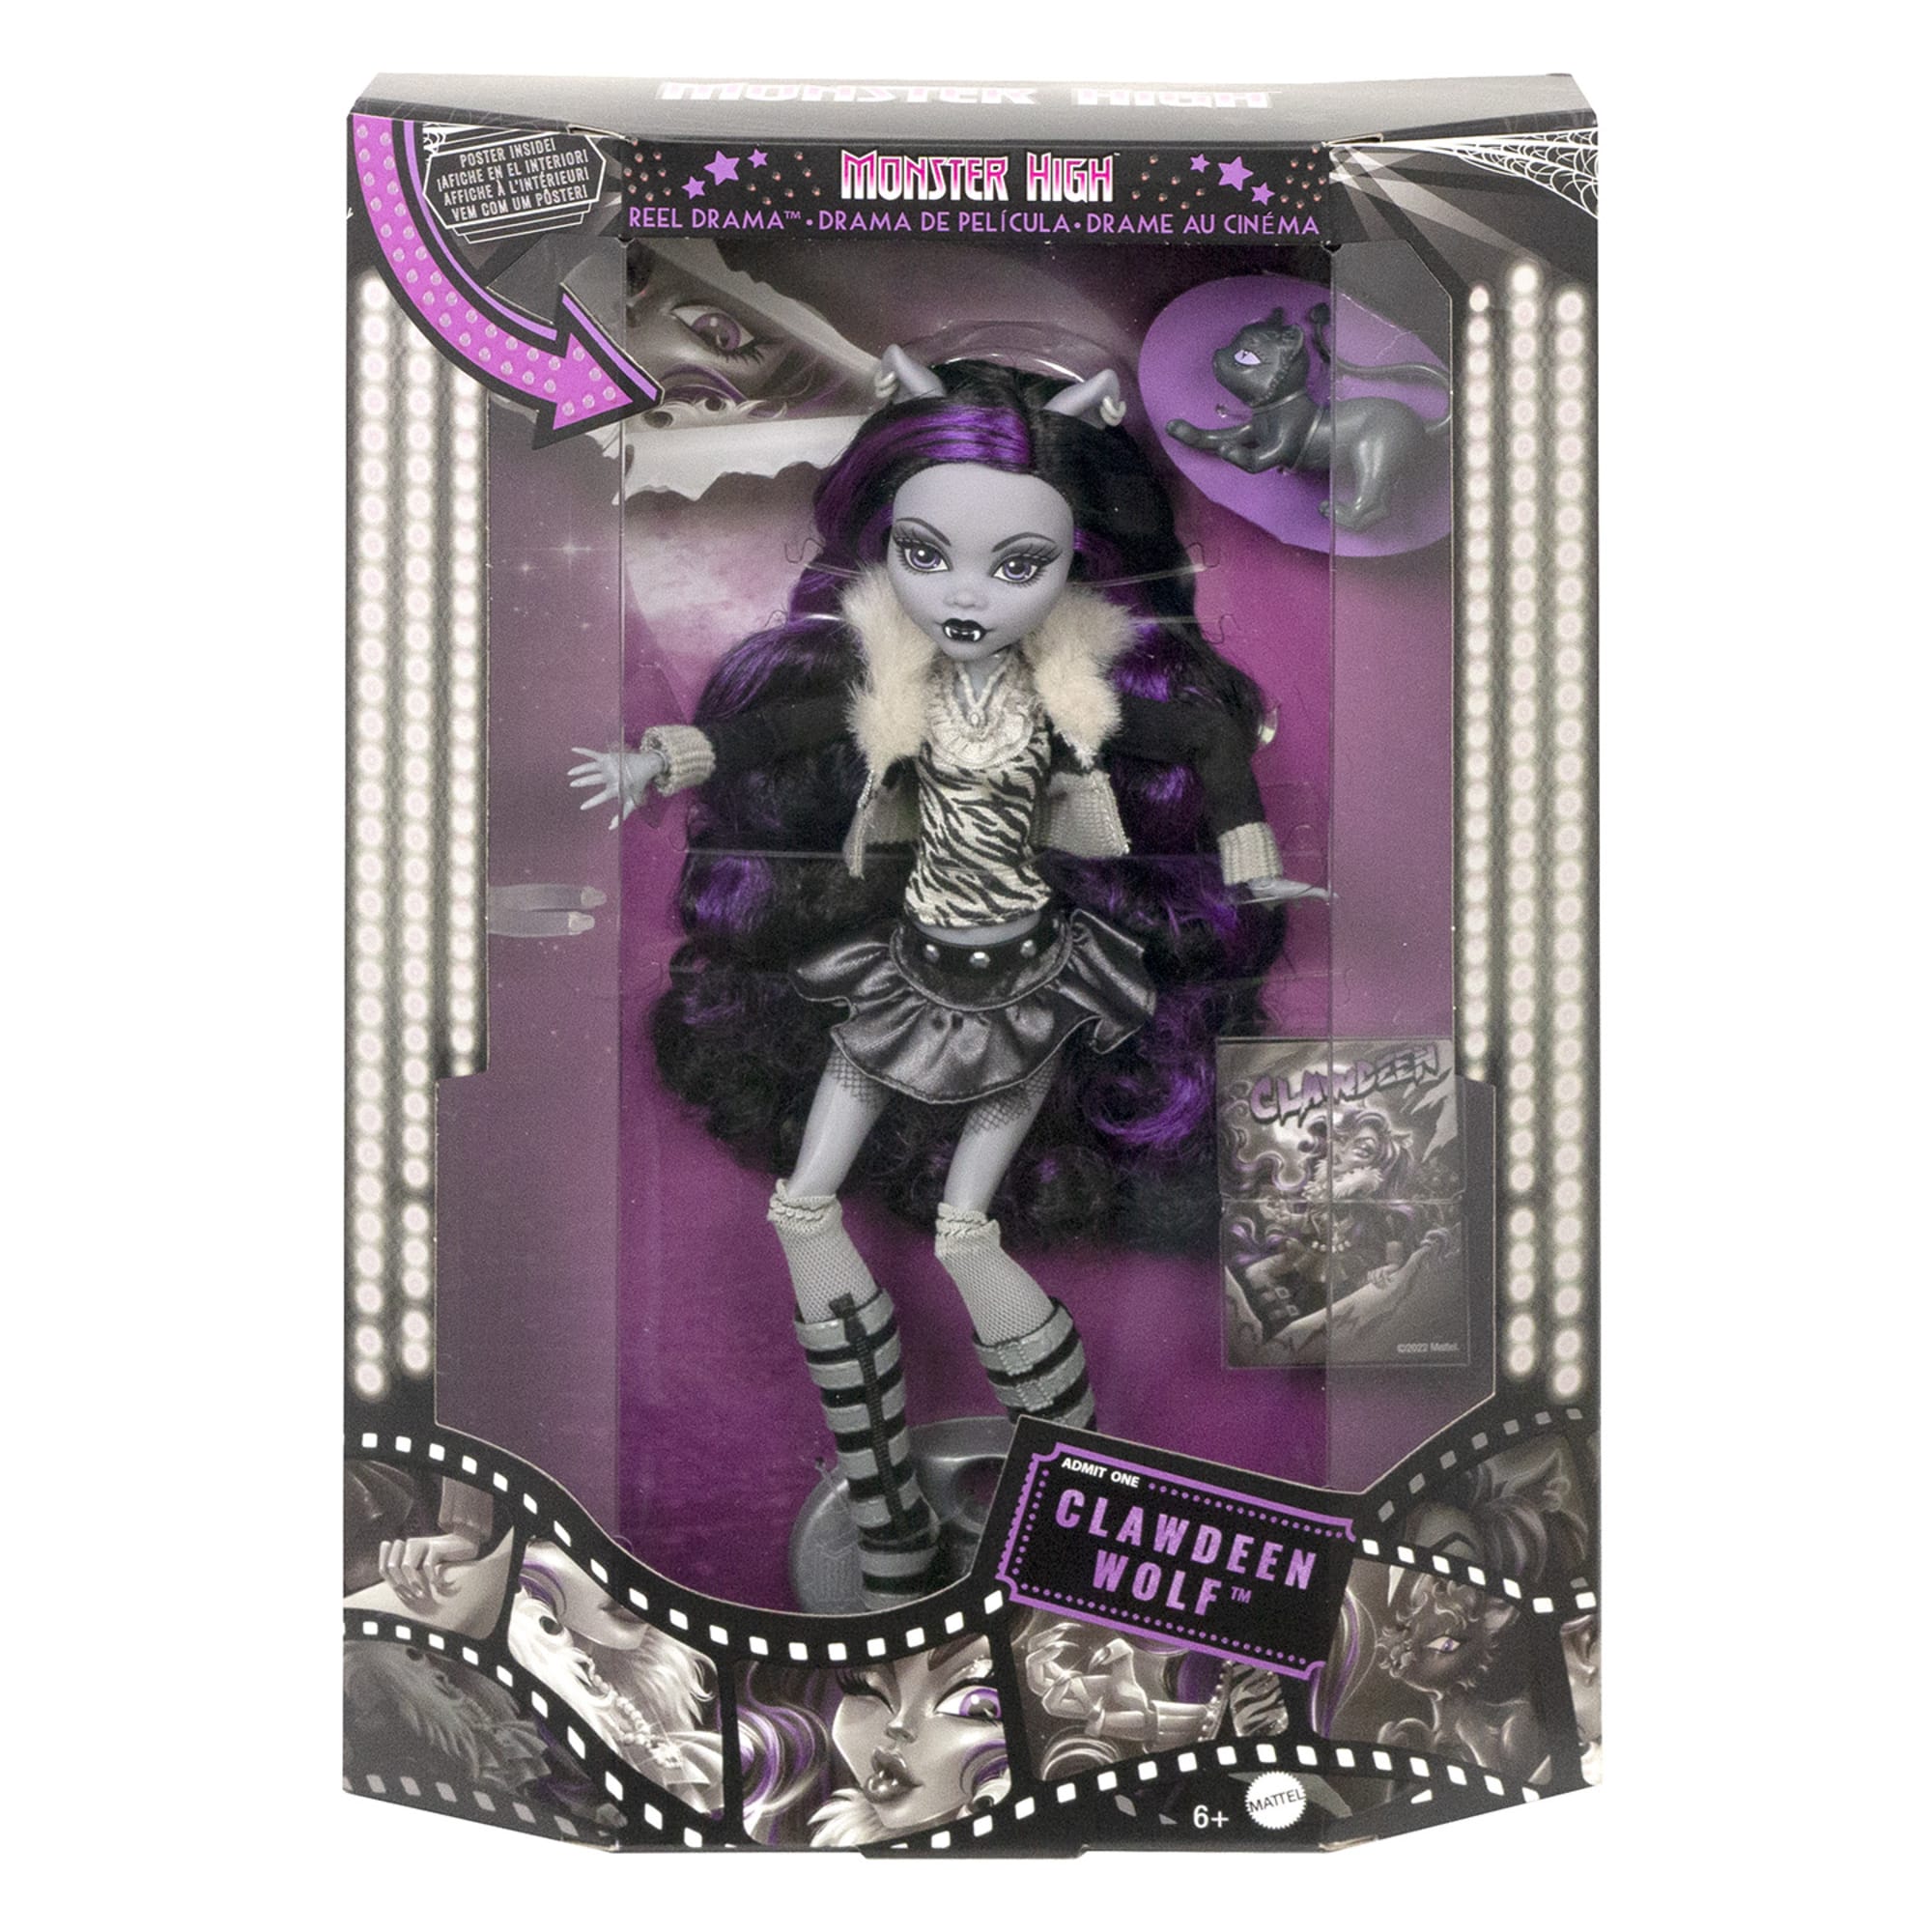 Mattel Monster High Reel Drama Clawdeen Wolf Doll- NEW - IN India